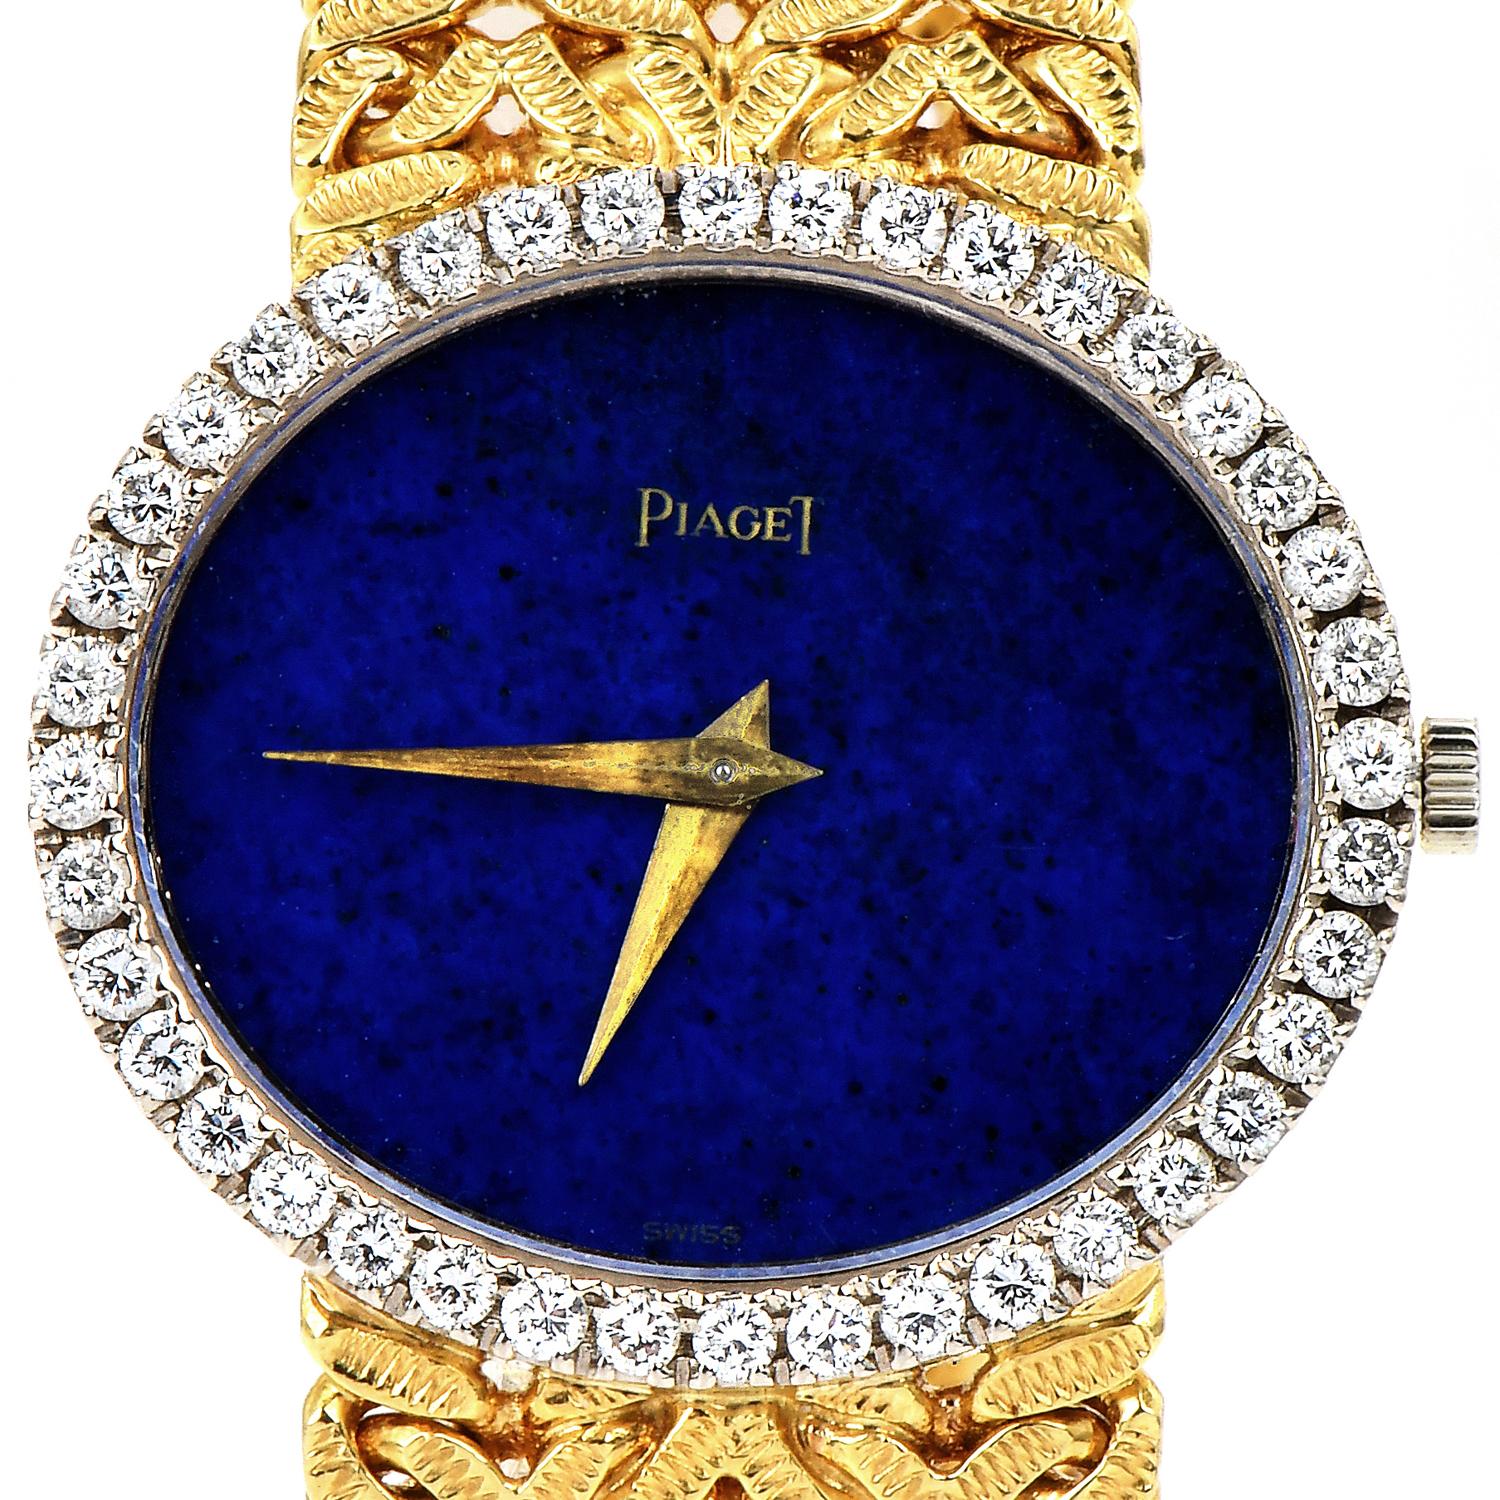 1970s designer Piaget's ladies' watch in solid 18-karat yellow gold. 

Embellished with factory set diamond. Sapphire Crystal, Genuine lapis Dial, 24mm case( without Crown), and 40 factory set round diamonds approx. 0.75 carats, F-G color VVS